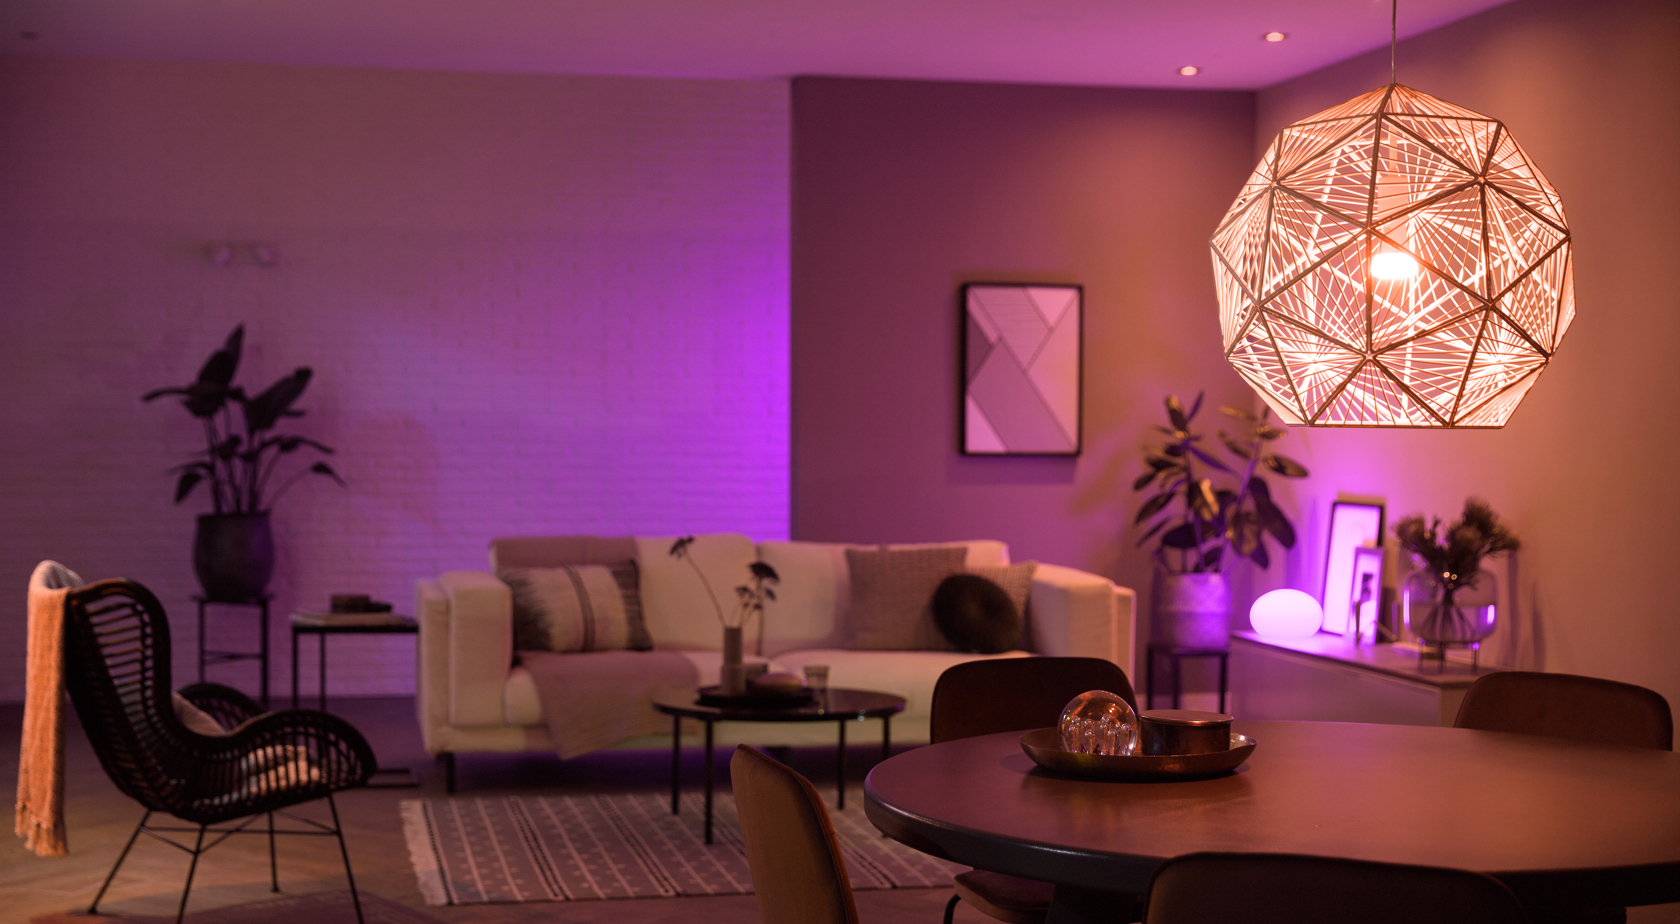 Philips Hue Perifo & Go hands-on: smart light for indoor and outdoor use